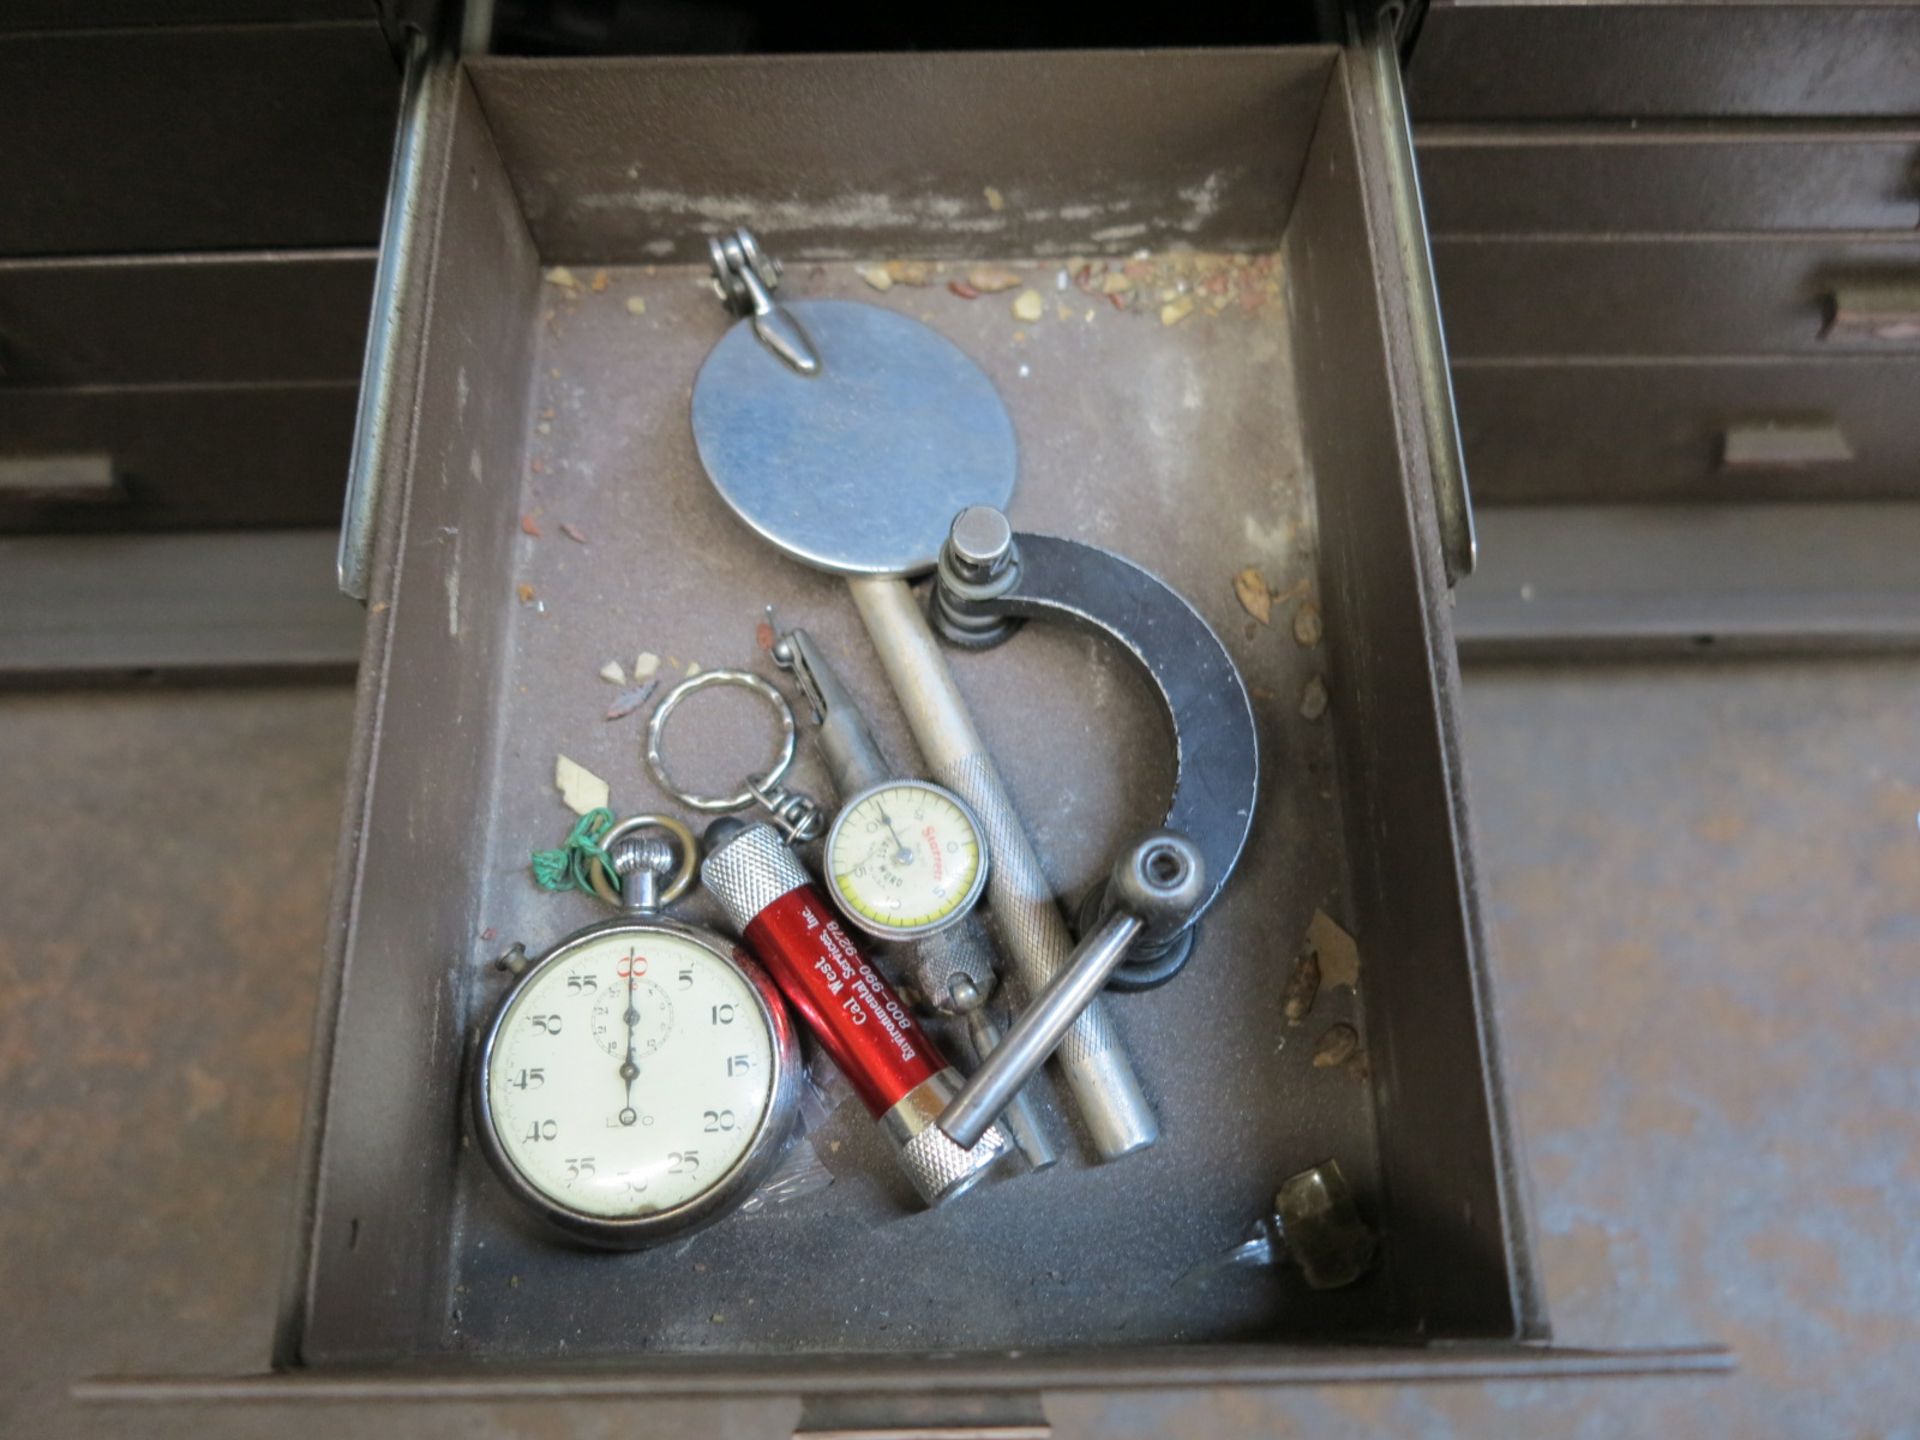 KENNEDY TOP BOX, FULL OF MACHINIST HAND TOOLS - Image 8 of 10